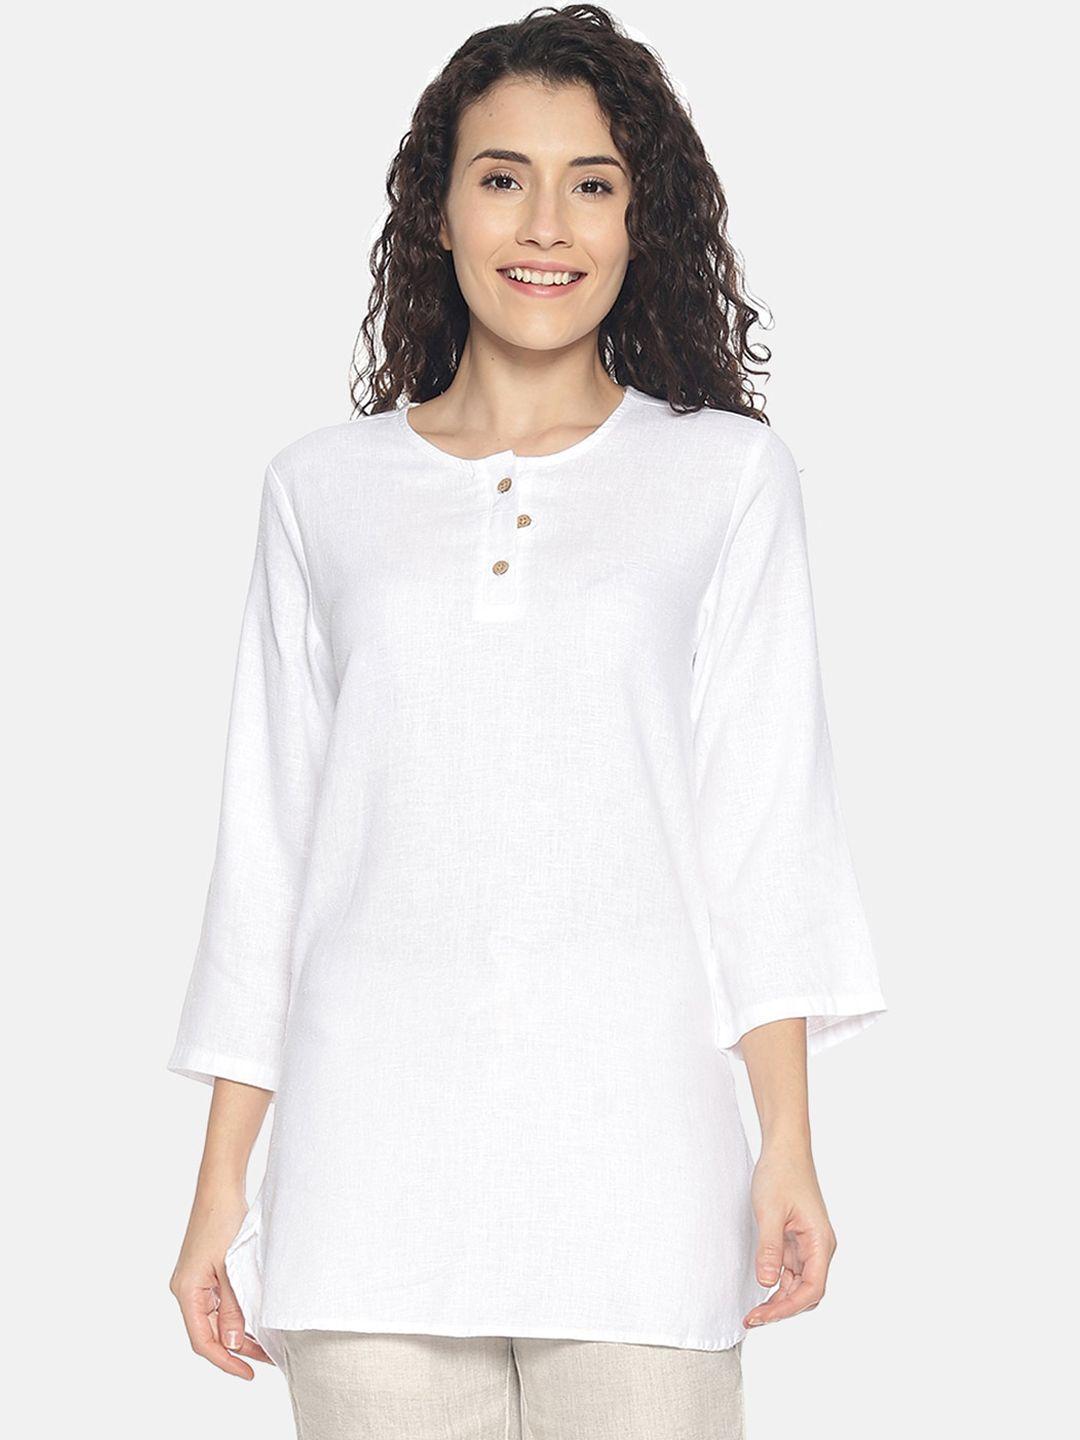 ecentric women white solid eco-friendly hemp sustainable top